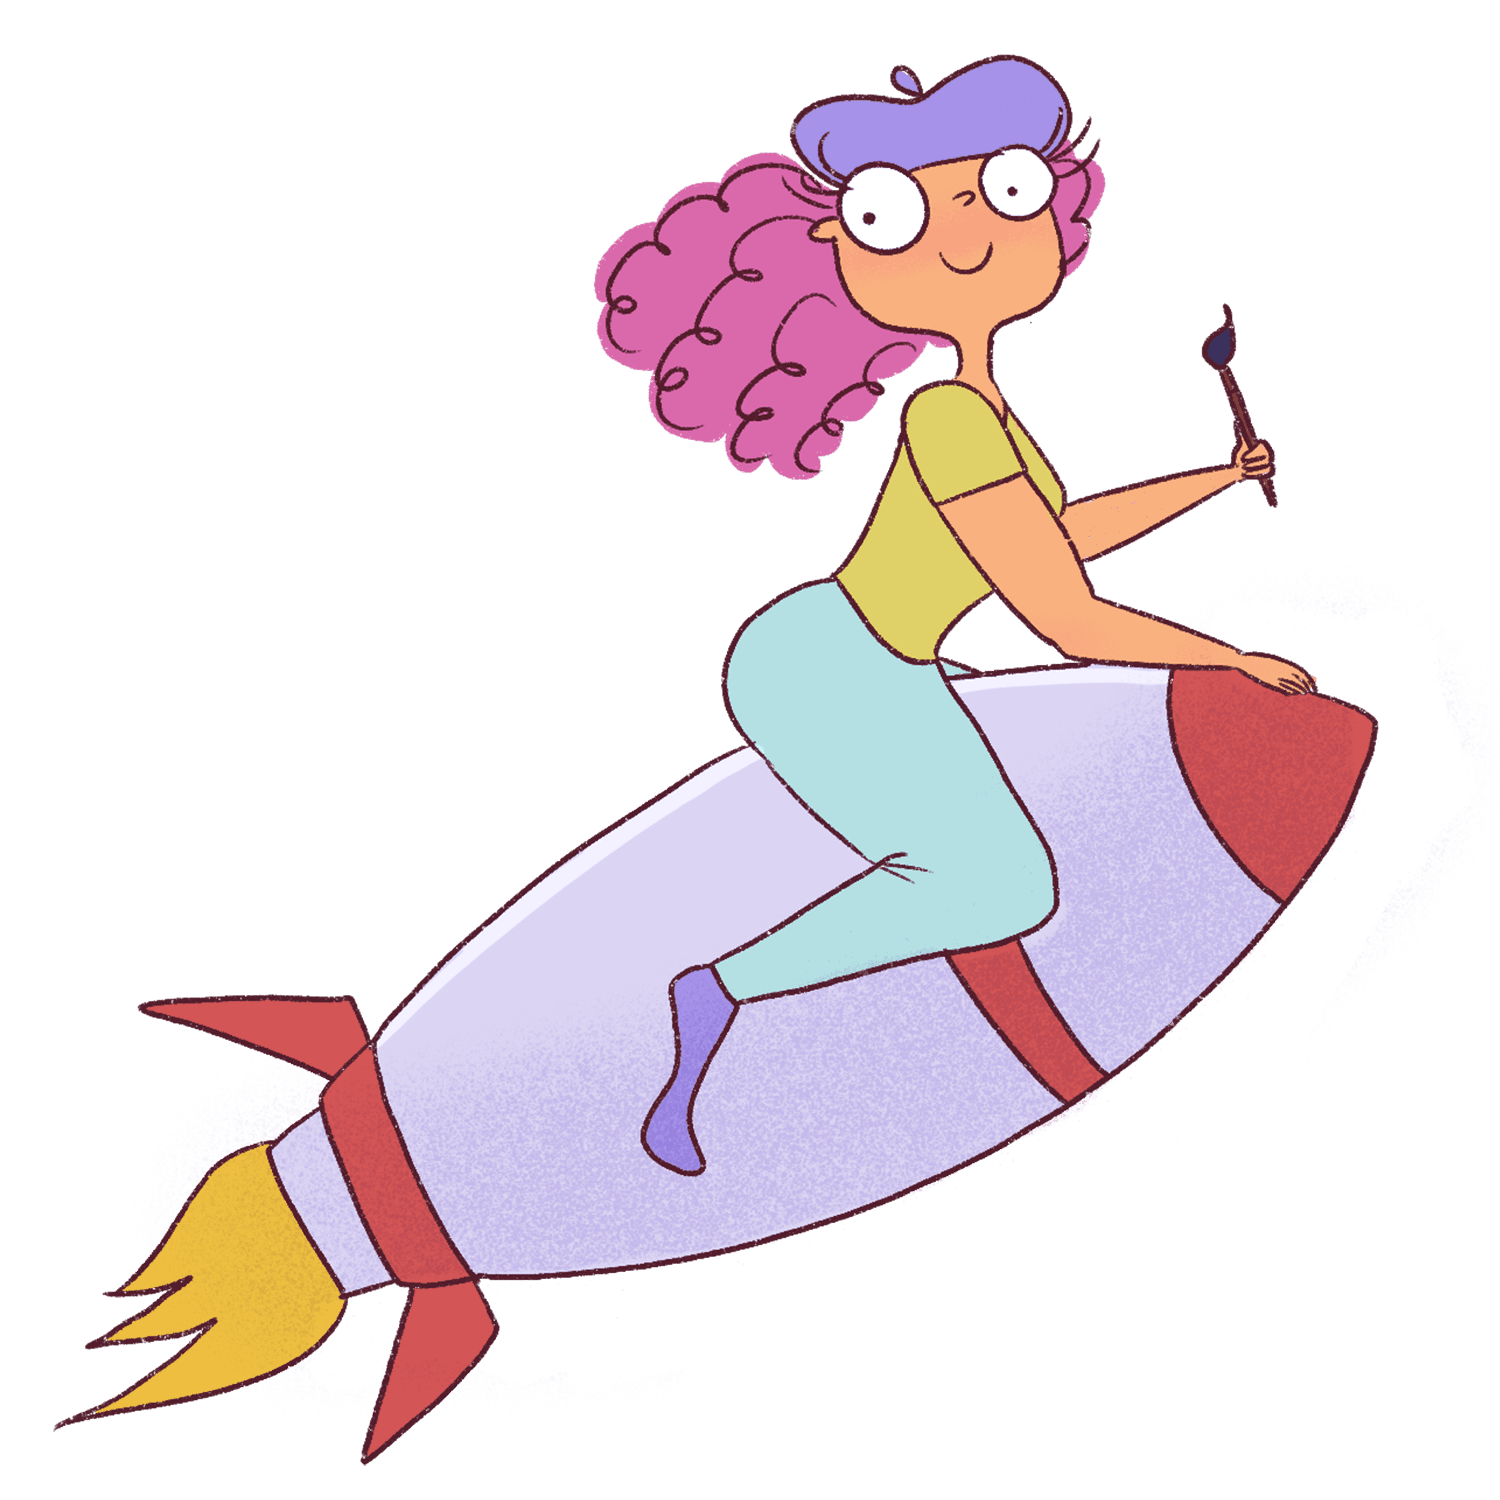 Instagram will help you launch yourself as an artist. Girl on a rocket